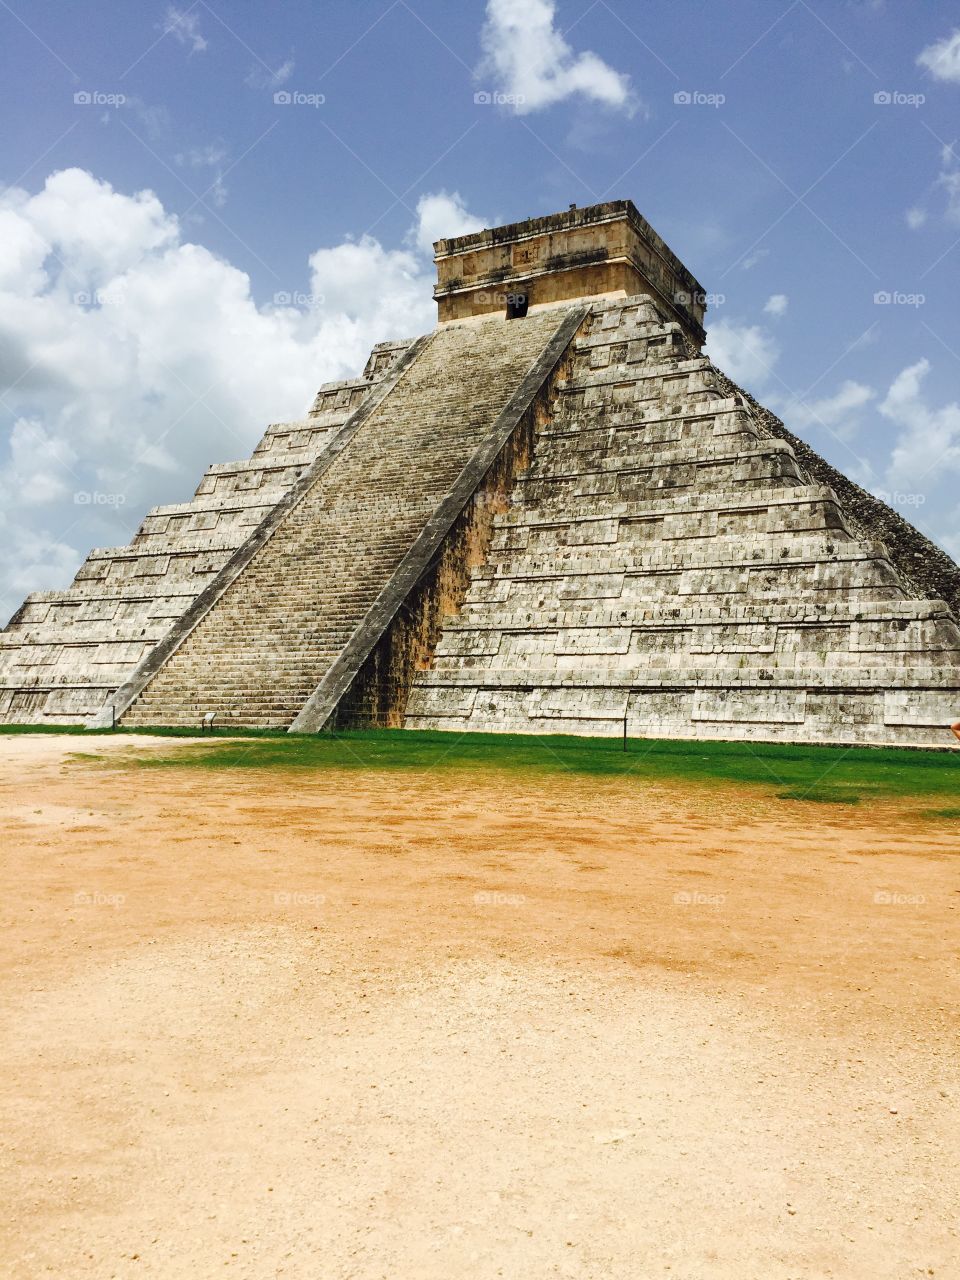 Pyramid, Ancient, Travel, Architecture, Archaeology